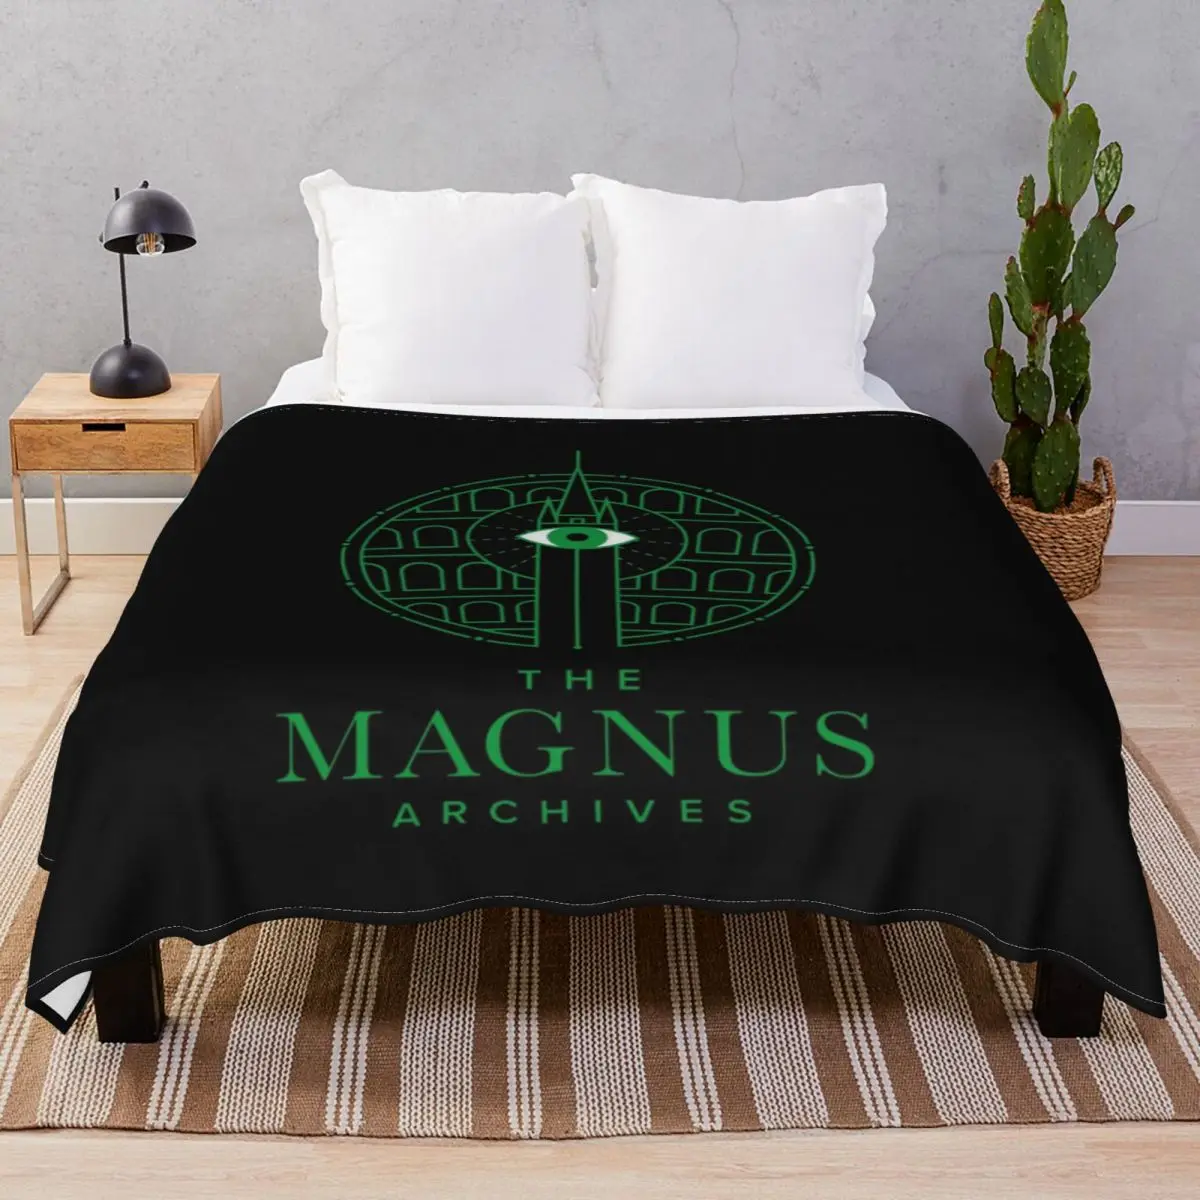 The Magnus Archives Blanket Flannel Autumn Multi-function Unisex Throw Blankets for Bed Home Couch Camp Office